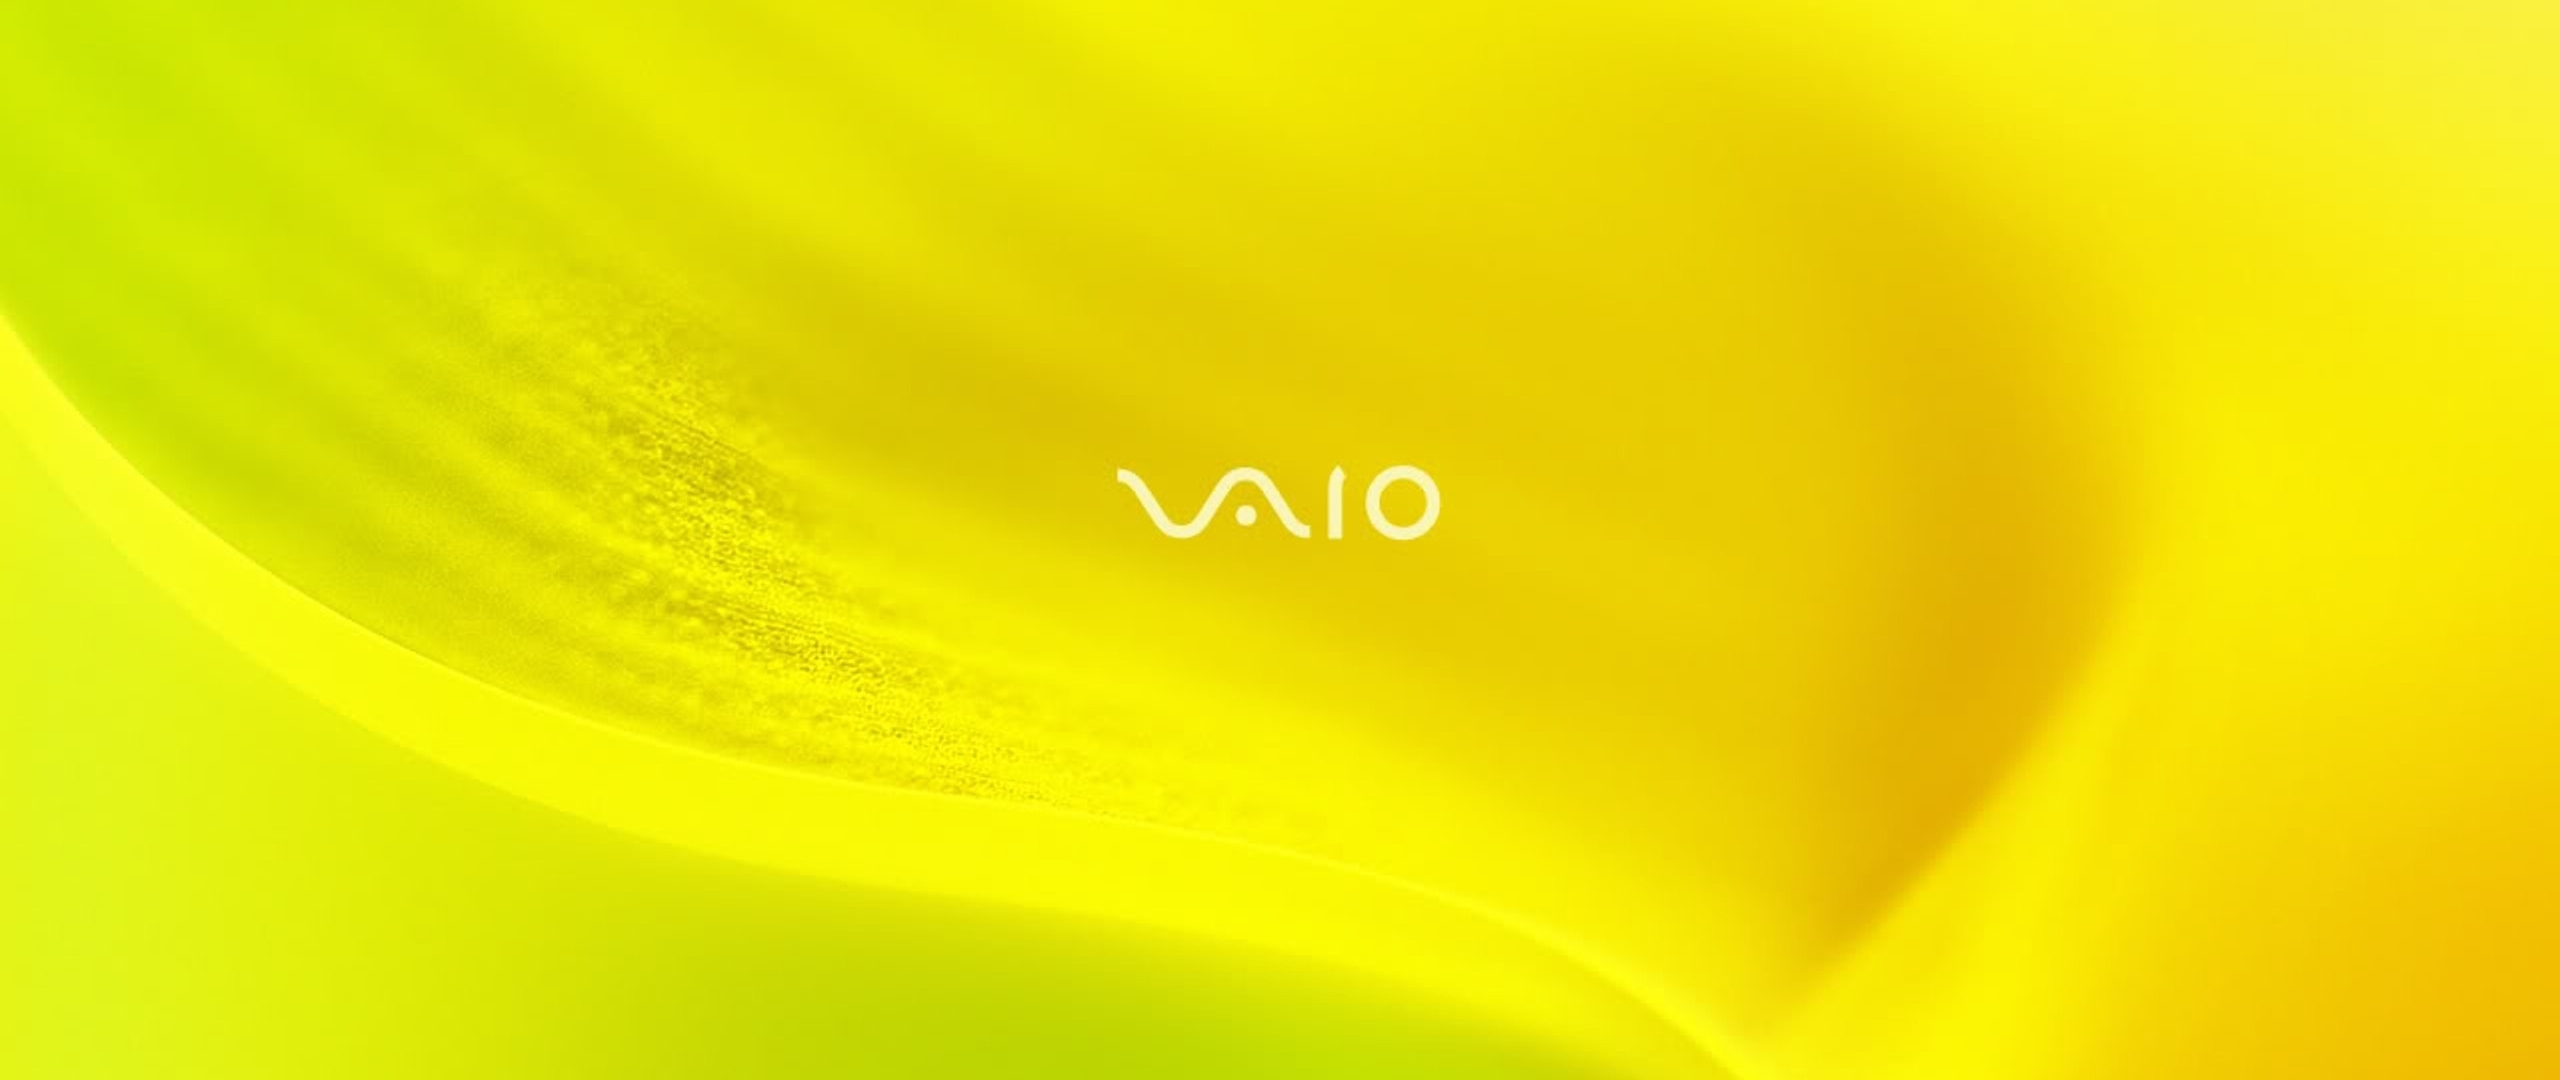 2560x1080 Sony Vaio Yellow System 2560x1080 Resolution Wallpaper Hd Hi Tech 4k Wallpapers Images Photos And Background